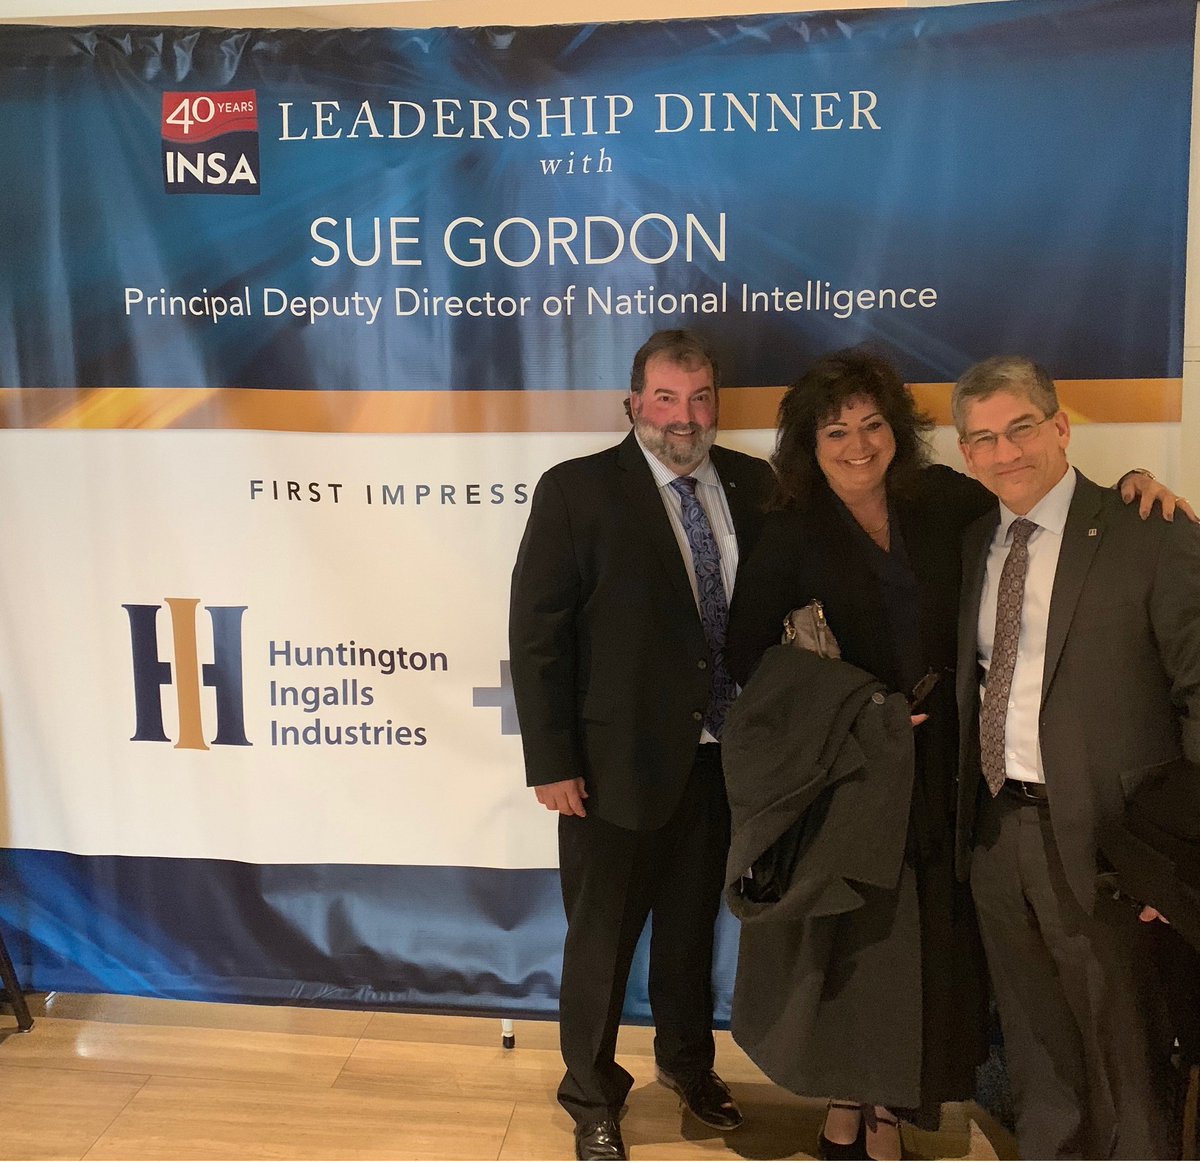 HII Mission Driven Innovative Solutions group (MDIS) employees Bryan Payne and Bonnie Gibson along with MDIS President Garry Schwartz at yesterday's  @INSAlliance Leadership Dinner in Northern Virginia. #INSALeadership #Intelligence #nationalsecurity